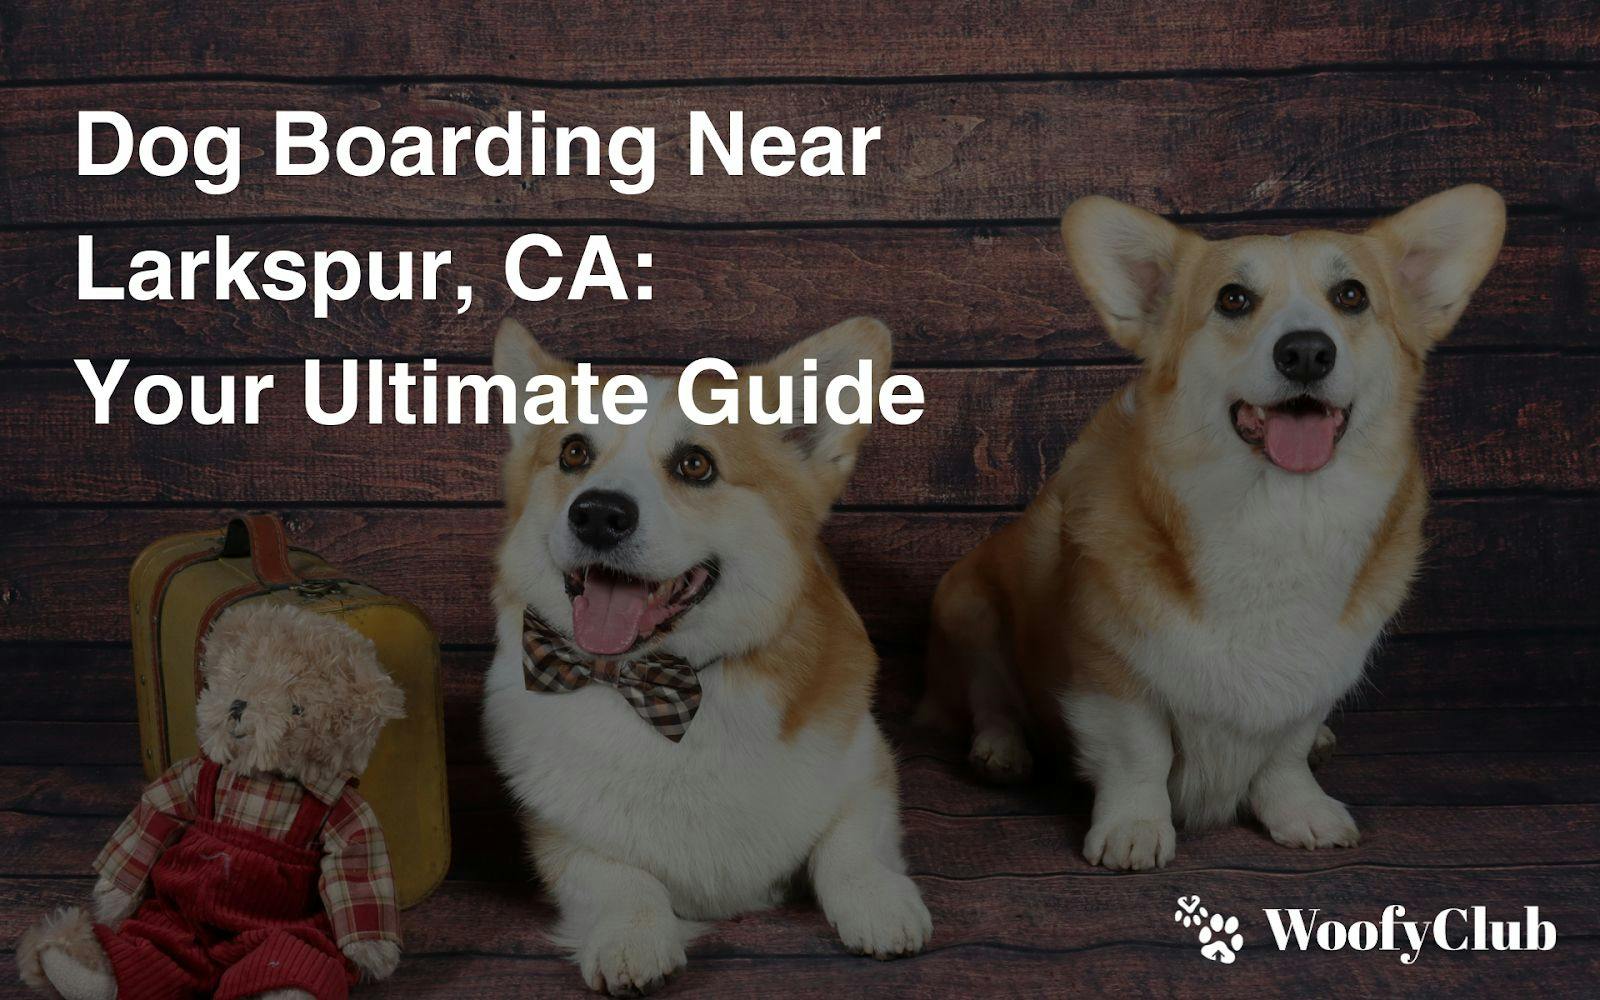 Dog Boarding Near Larkspur, CA: Your Ultimate Guide